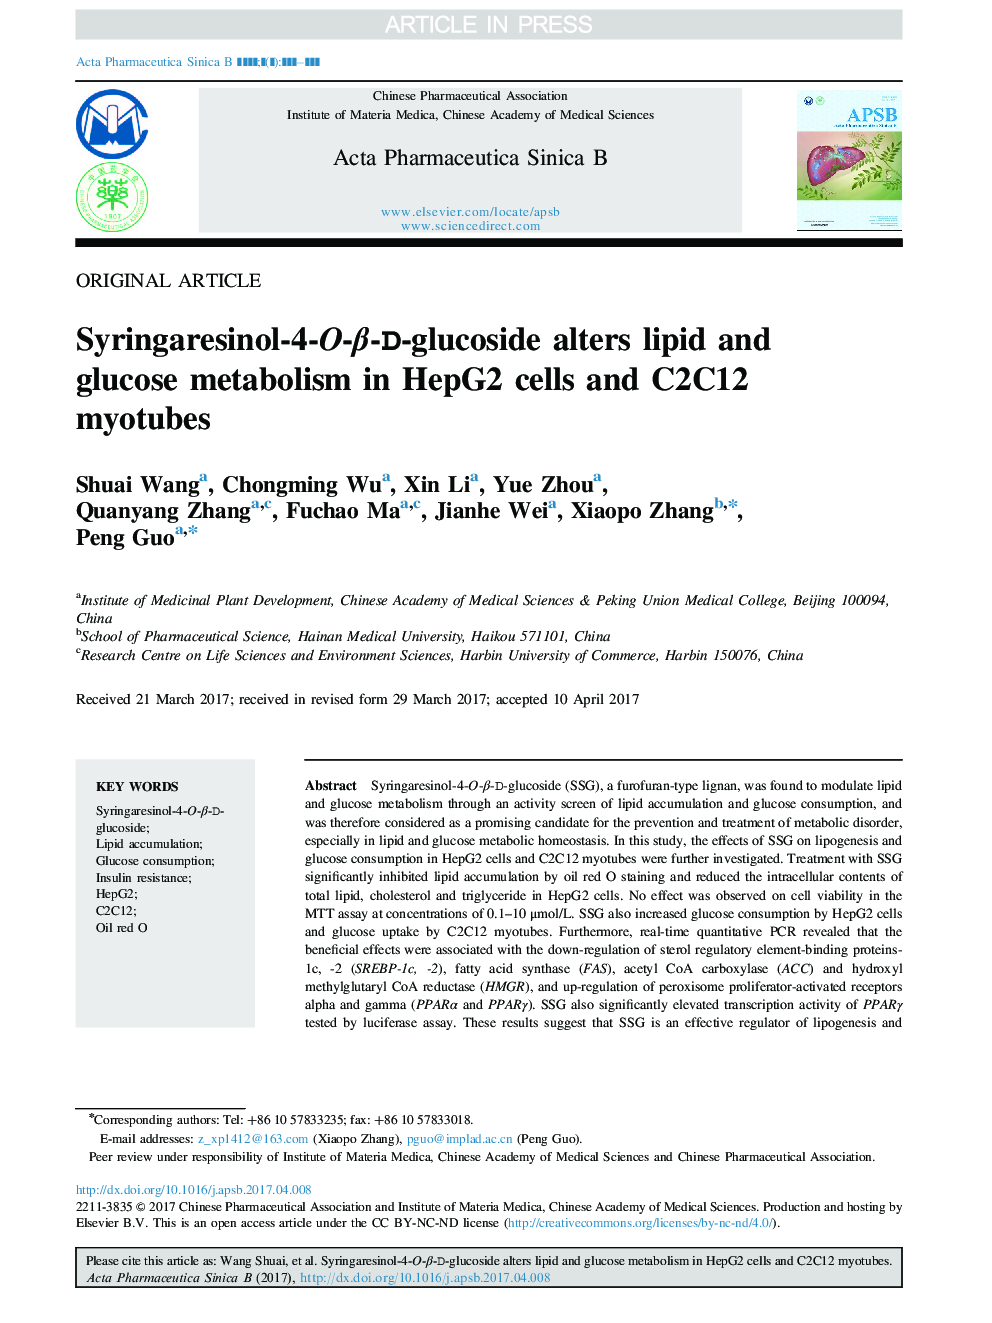 Syringaresinol-4-O-Î²-d-glucoside alters lipid and glucose metabolism in HepG2 cells and C2C12 myotubes